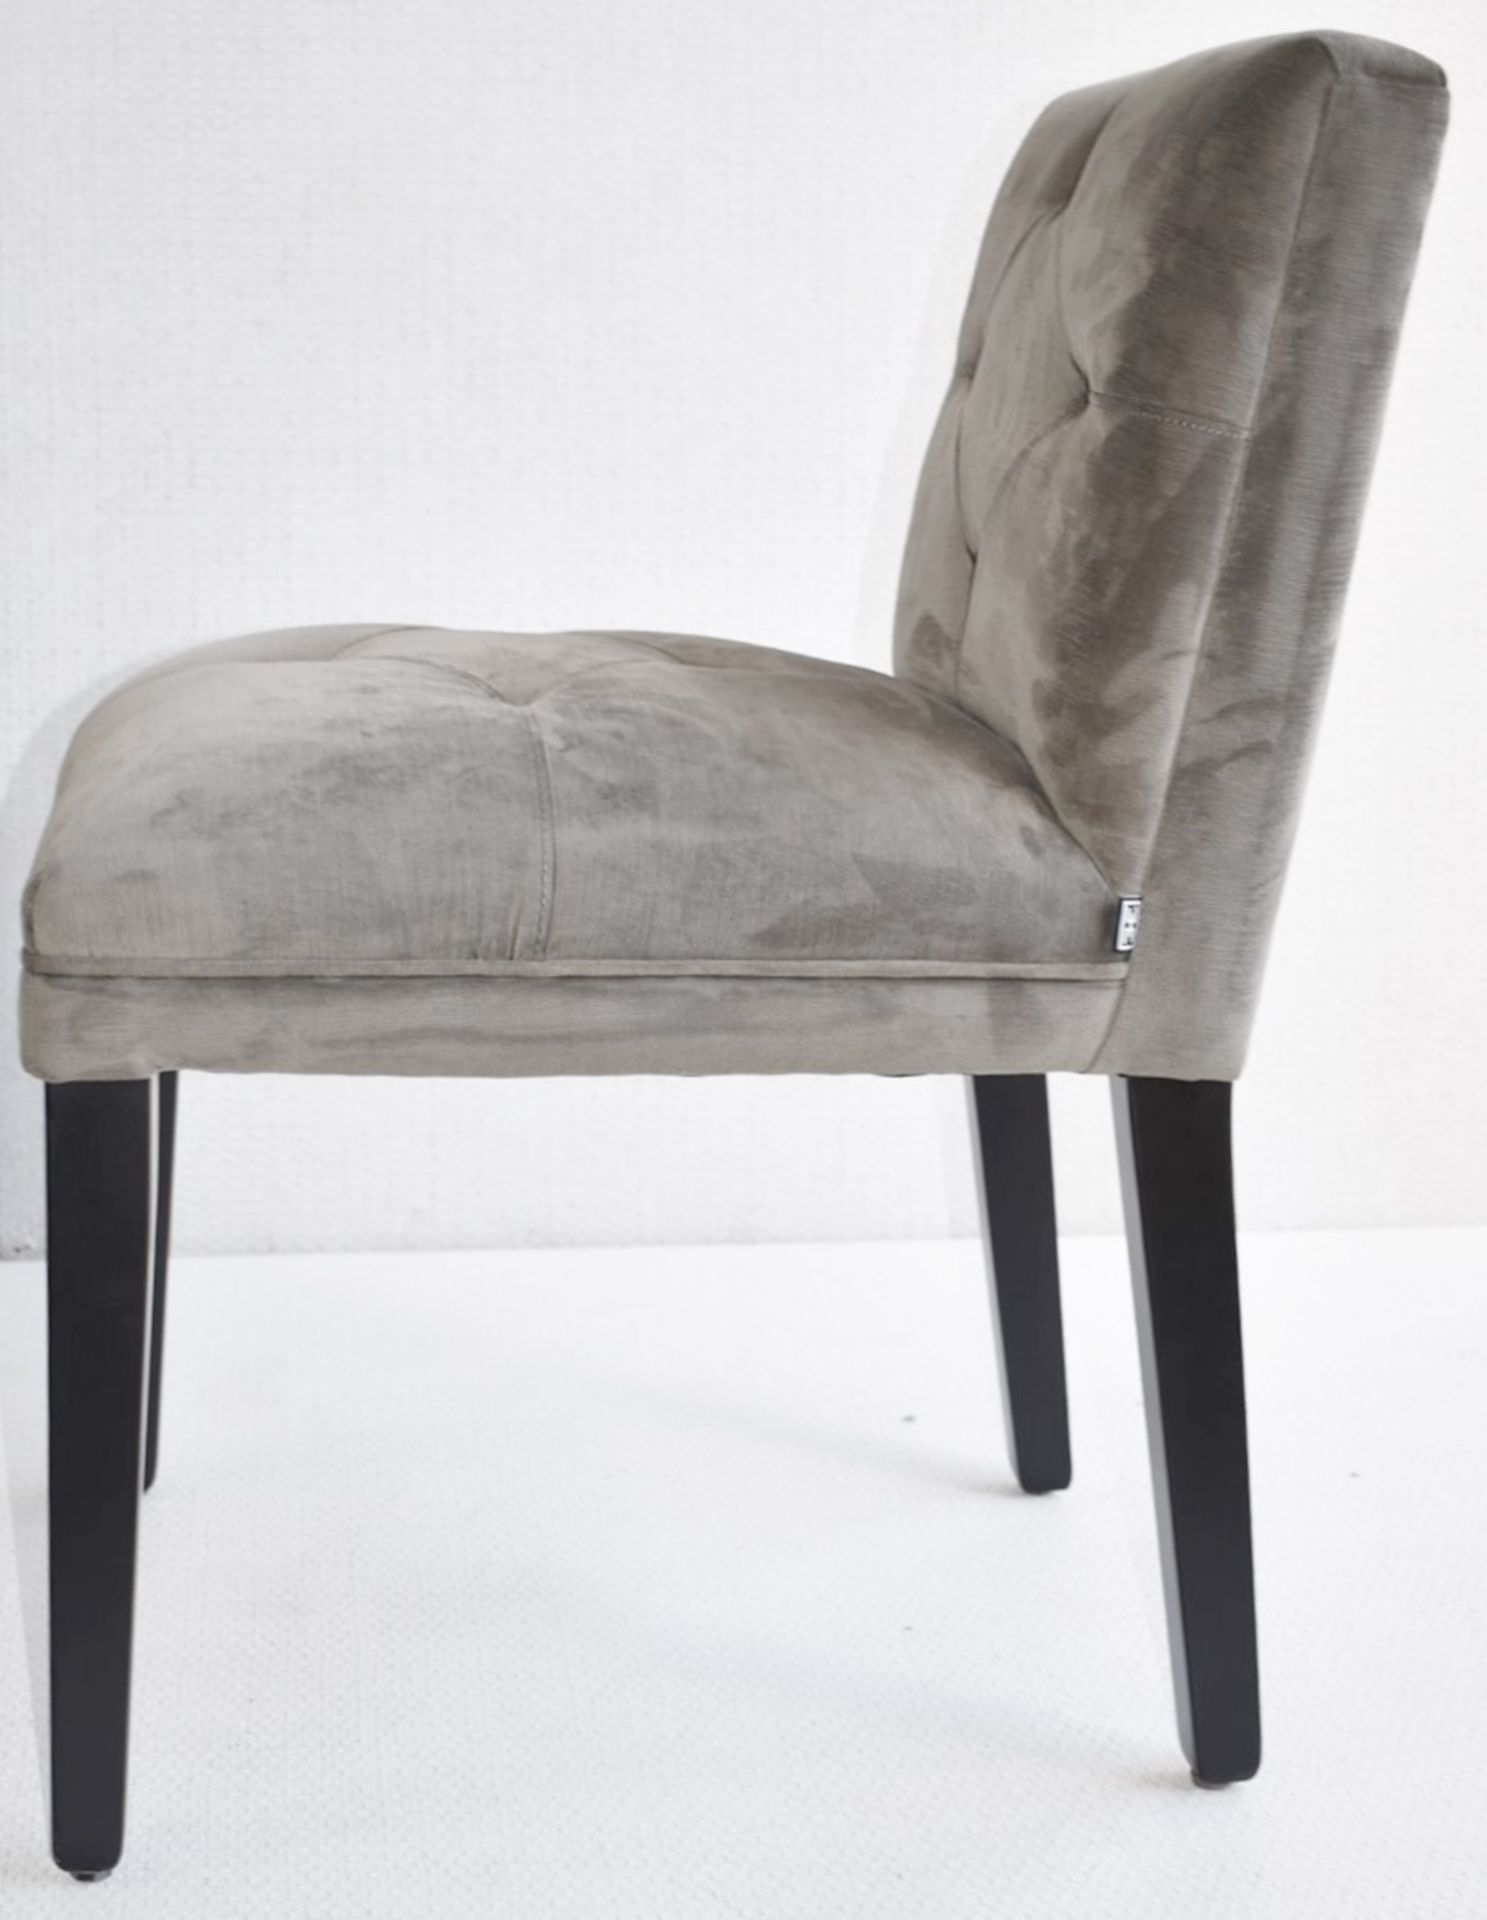 A Pair Of EICHHOLTZ 'Cesare' Luxury Button-back Dining Chairs in Granite Grey - Original RRP £1,160 - Image 8 of 10